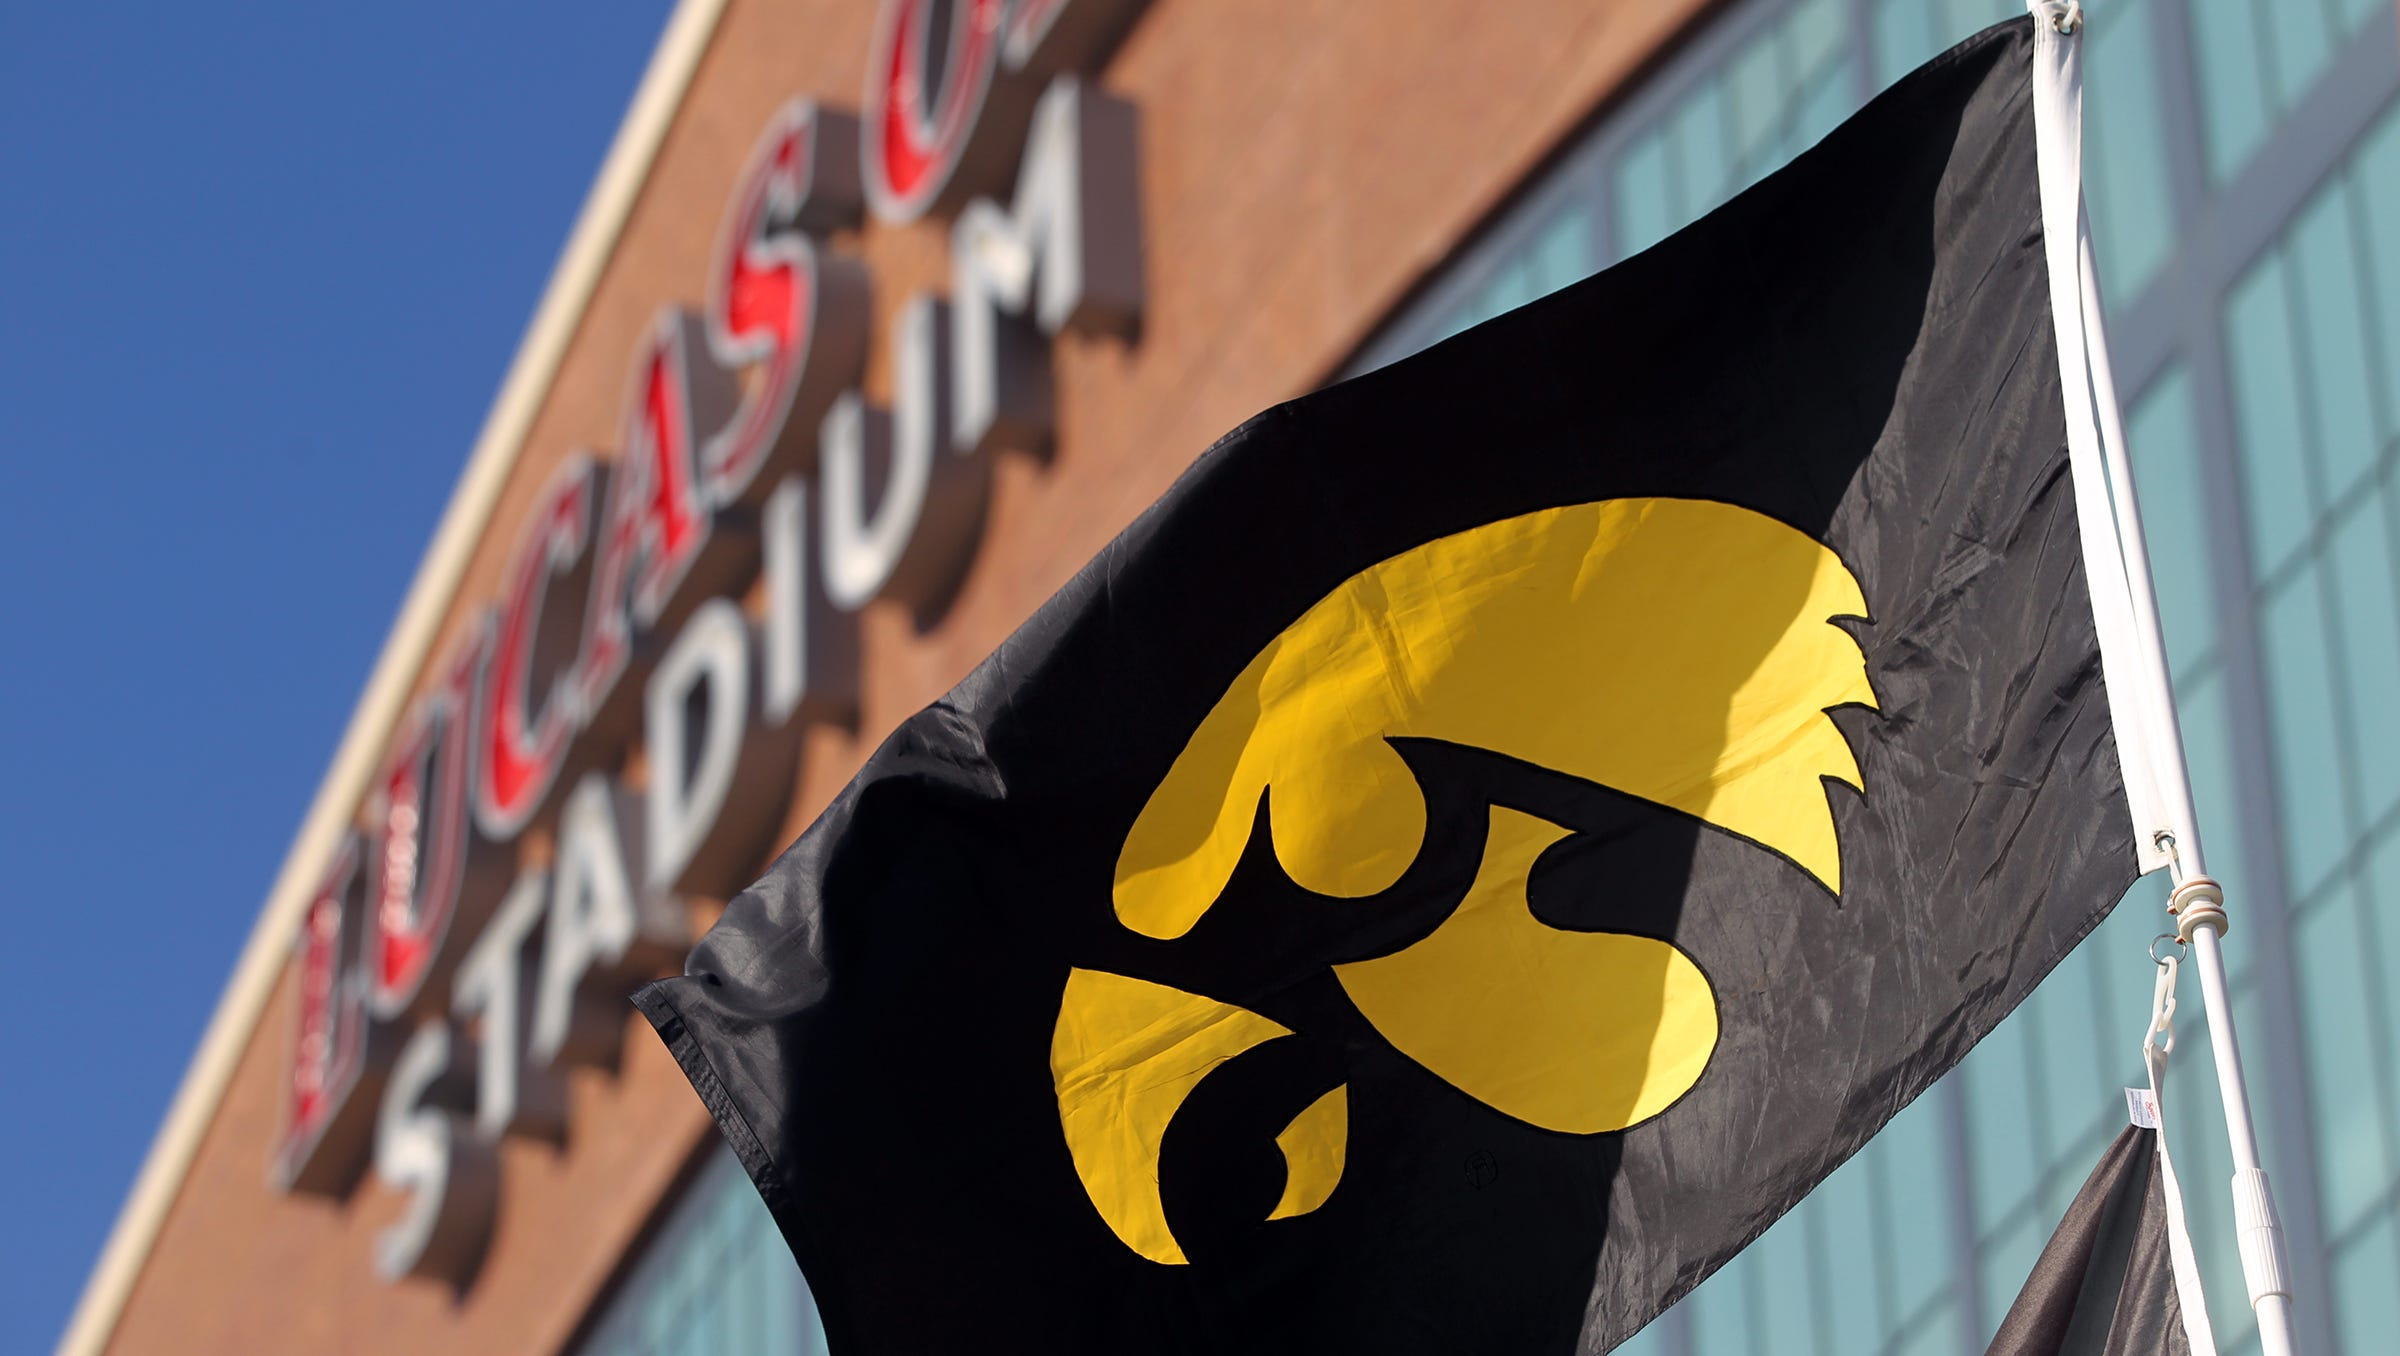 An Iowa flag waves at a tailgate prior to the Hawkeyes' Big Ten Championship game against Michigan State at Lucas Oil Stadium in Indianapolis, Ind. on Saturday, Dec. 5, 2015.